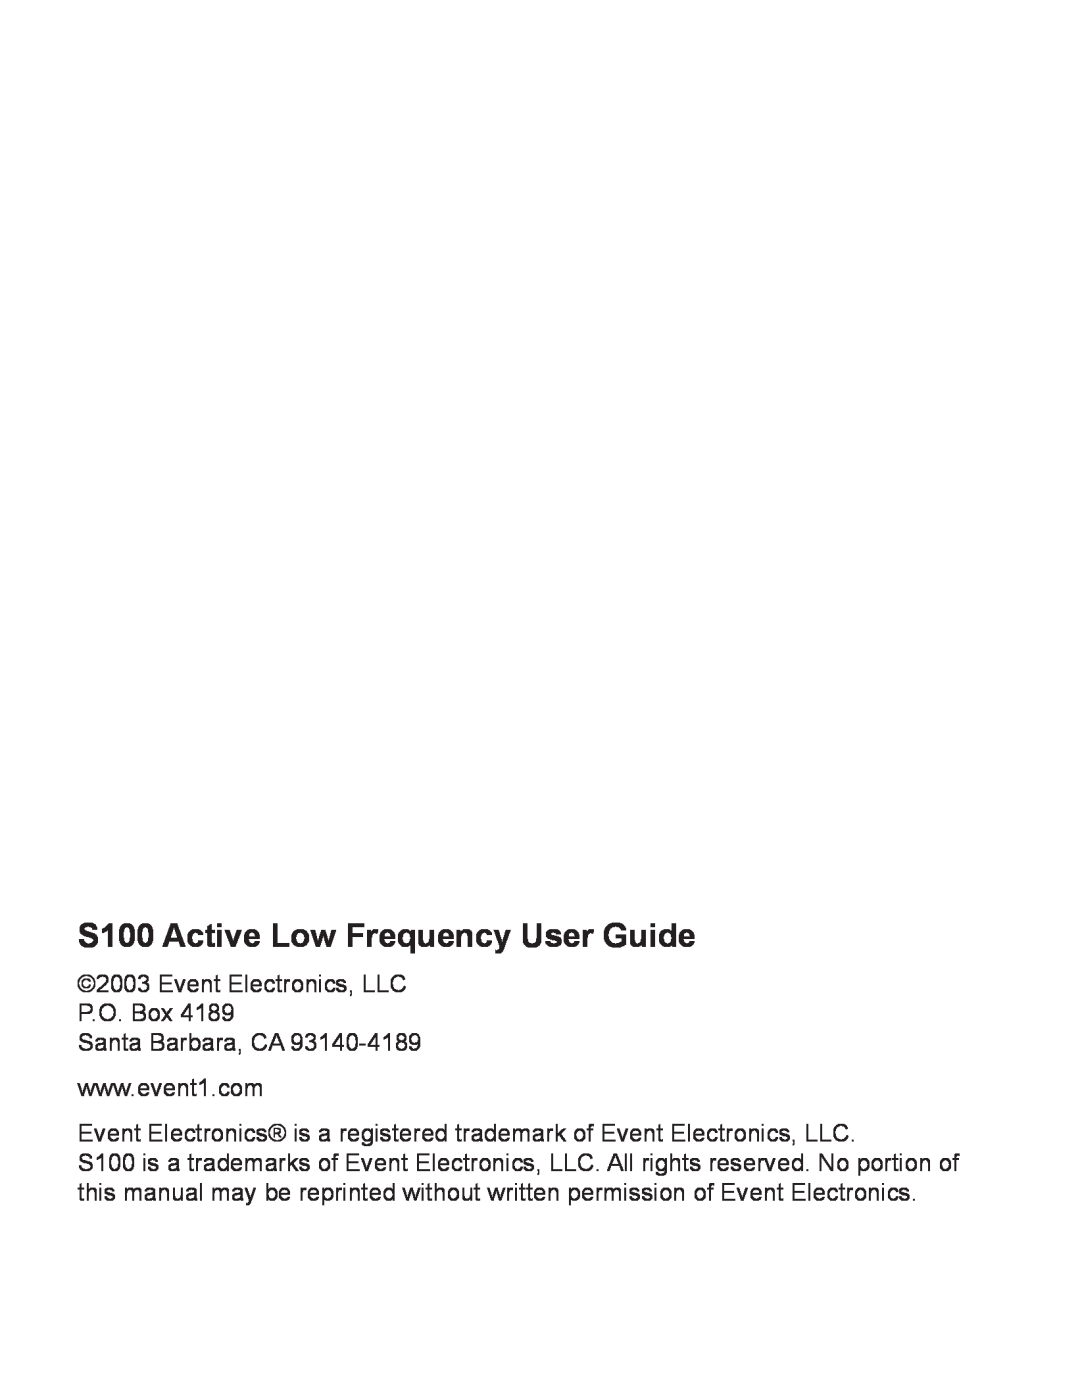 Event electronic manual S100 Active Low Frequency User Guide, Event Electronics, LLC P.O. Box 